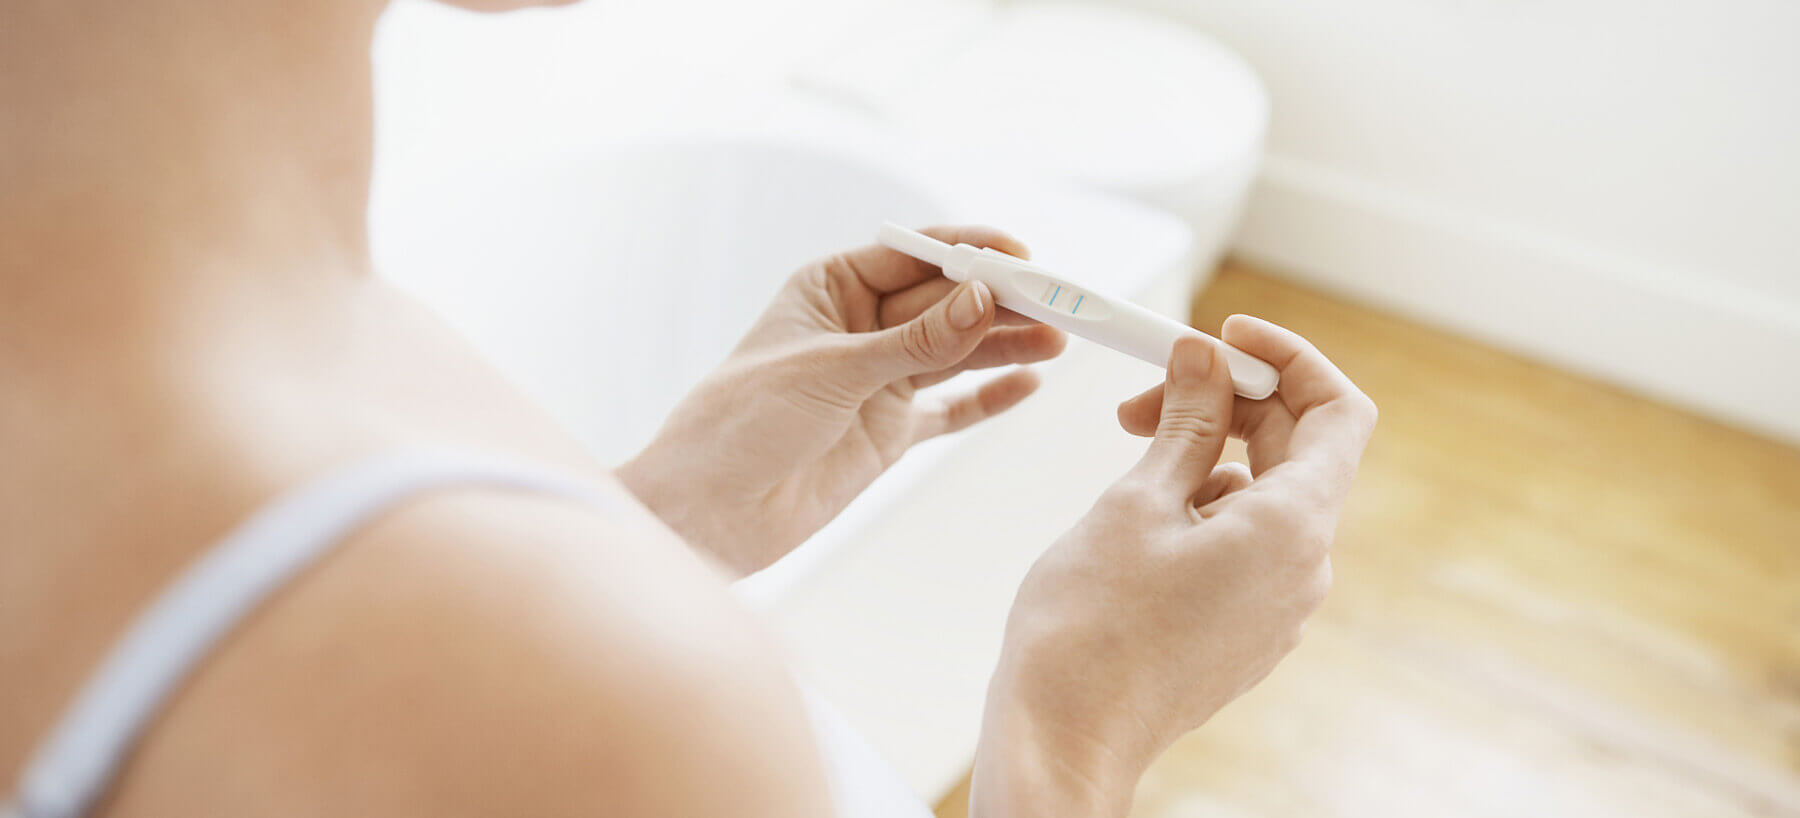 Am I Pregnant? Tips on using a pregnancy test kit